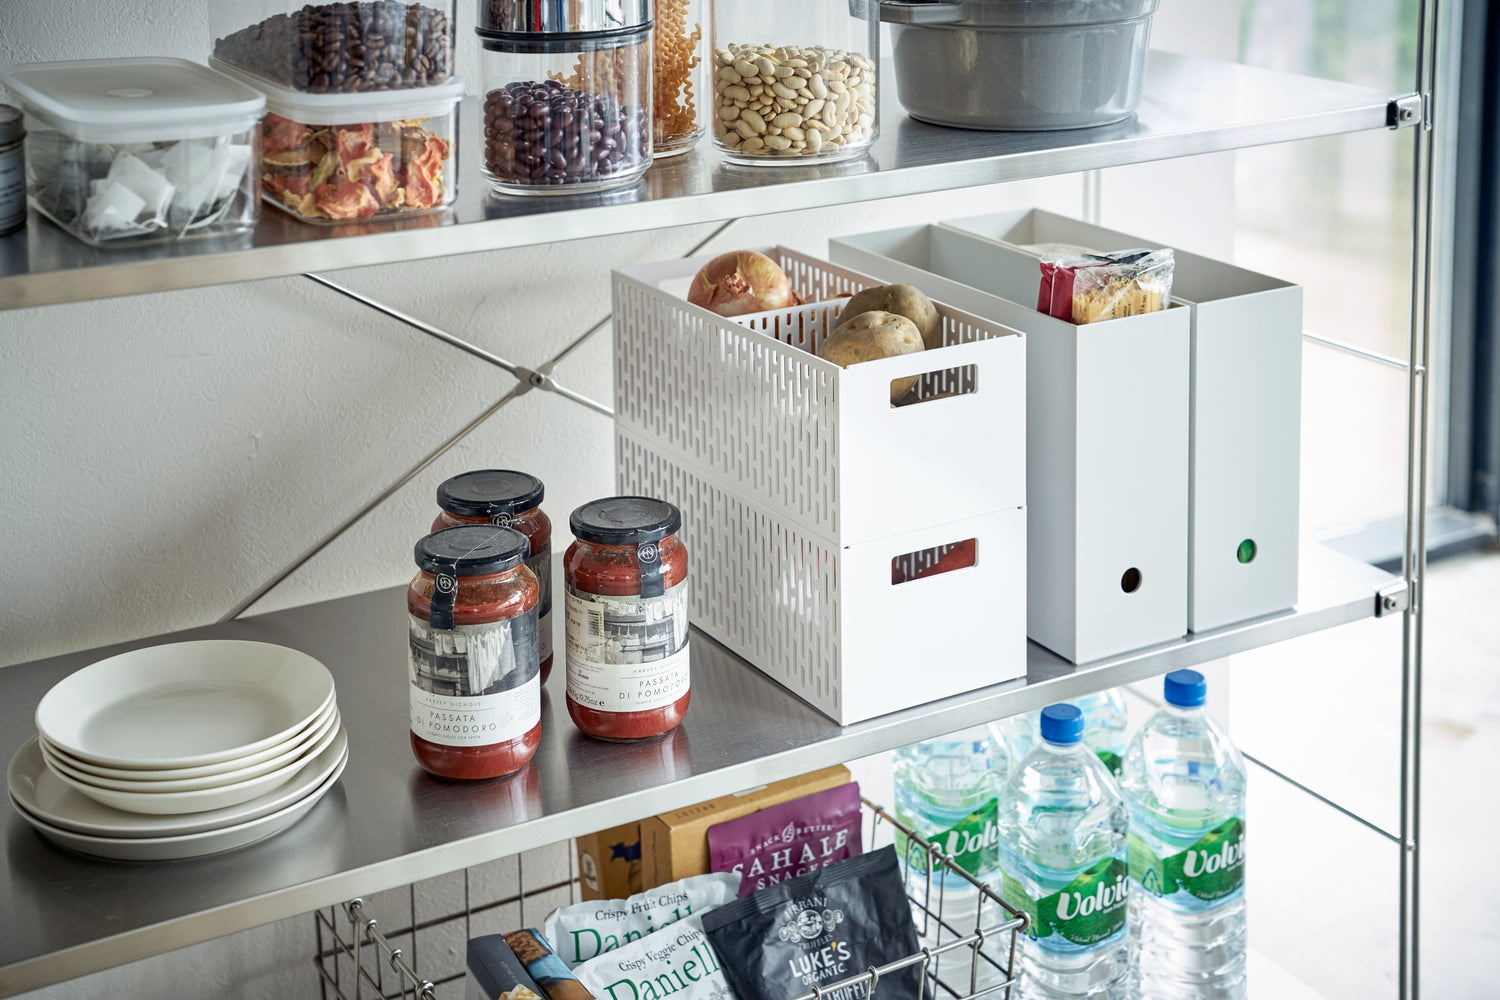 View 3 - White Stackable Vegetable Stockers stacked and holding food items on kitchen pantry shelf by Yamazaki Home.